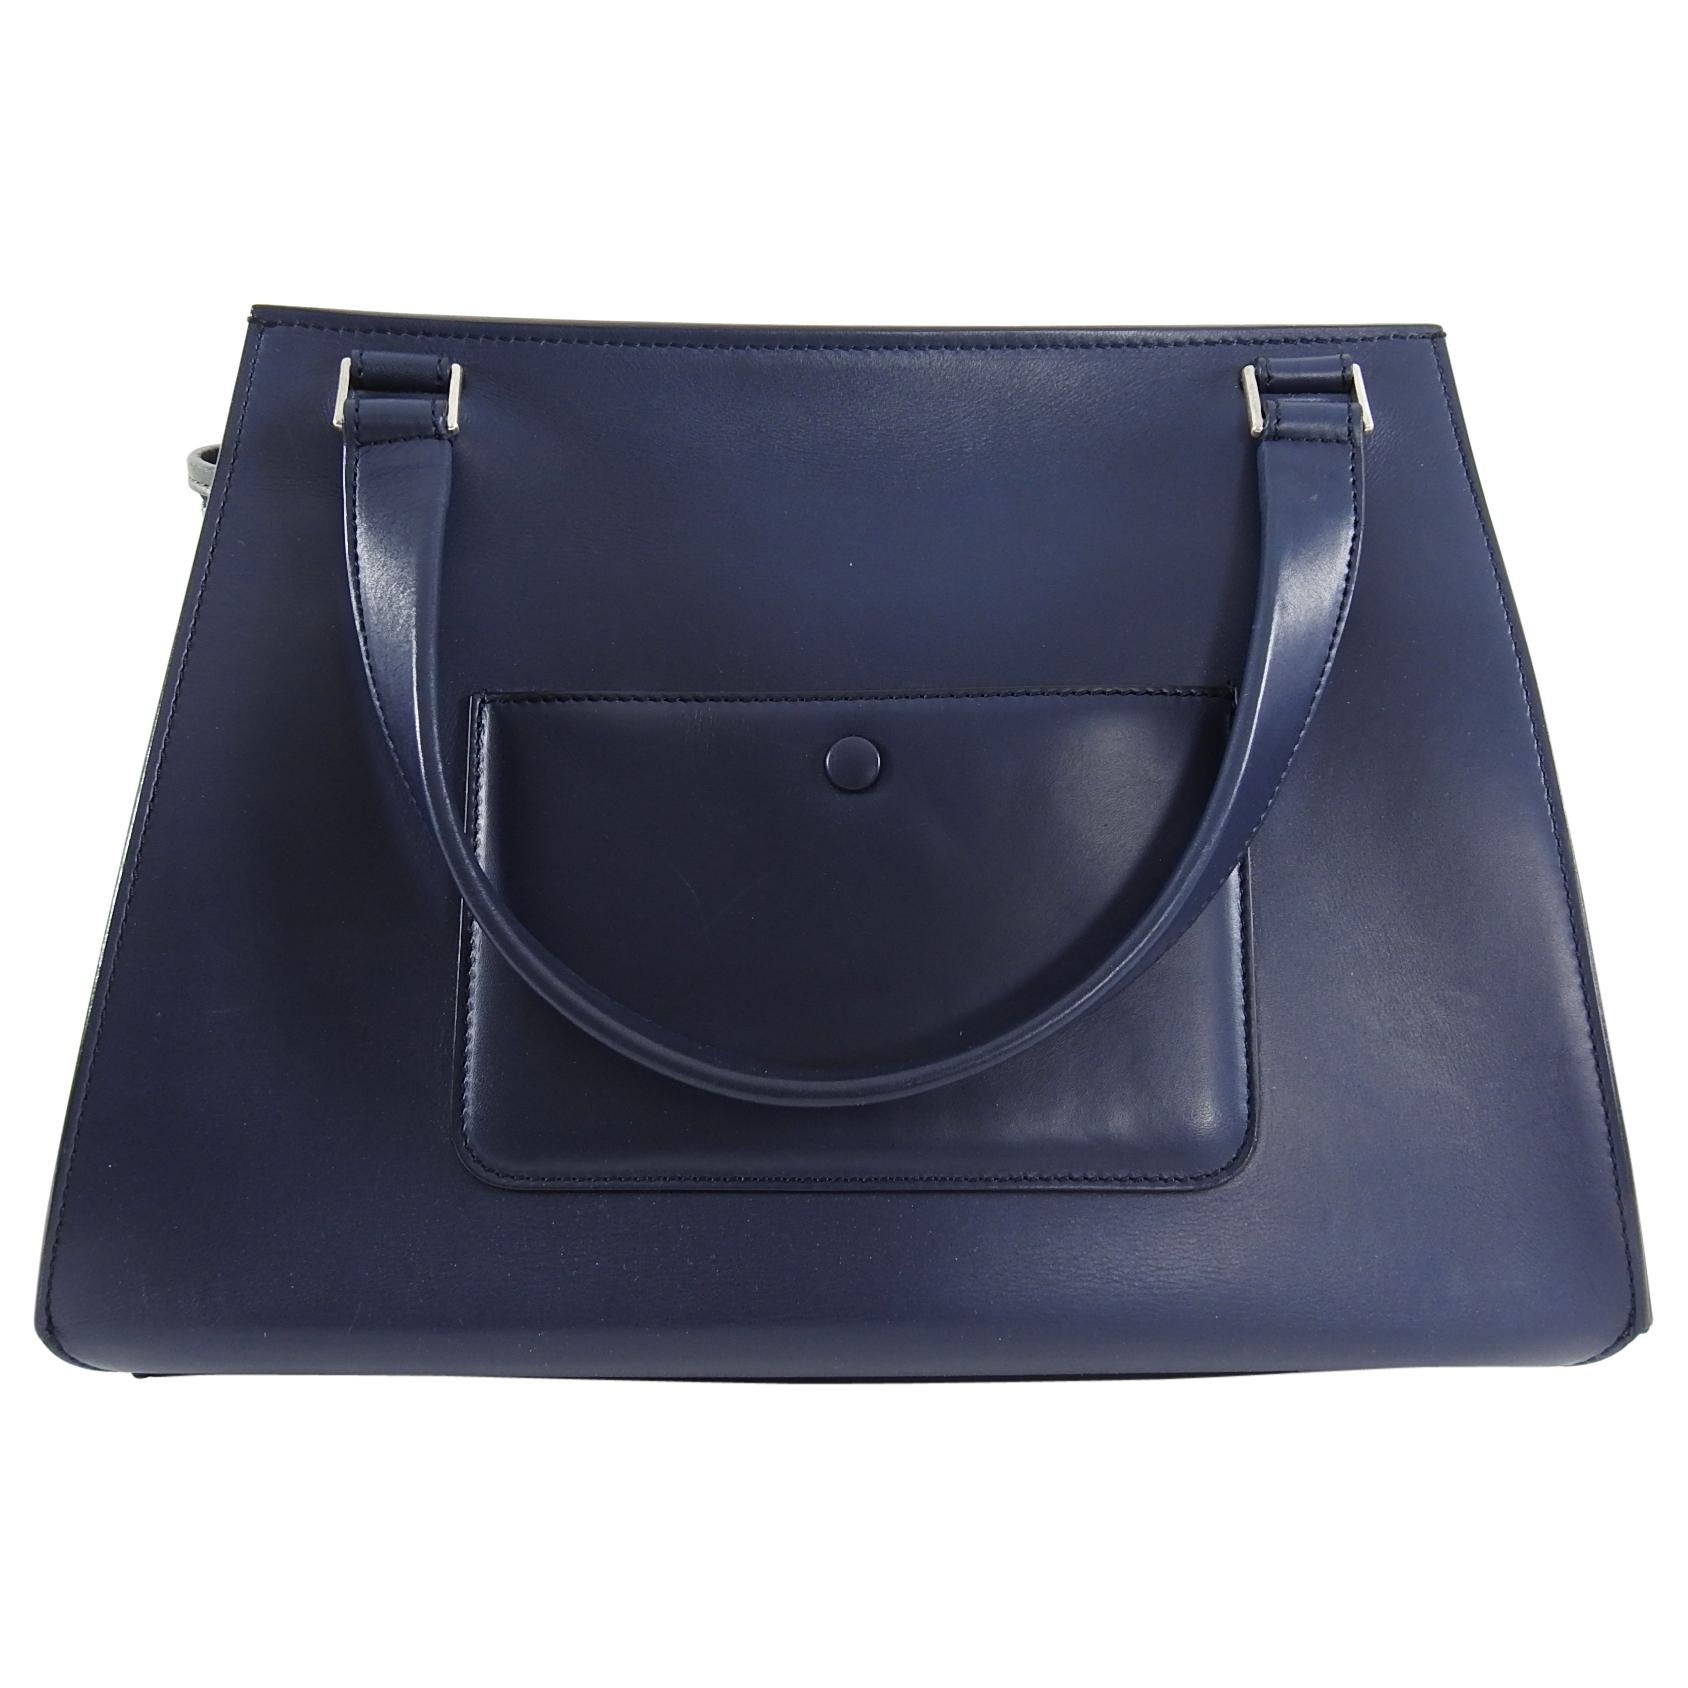 Celine Tricolor Blue Black Grey Small Edge Bag In Good Condition For Sale In Toronto, ON